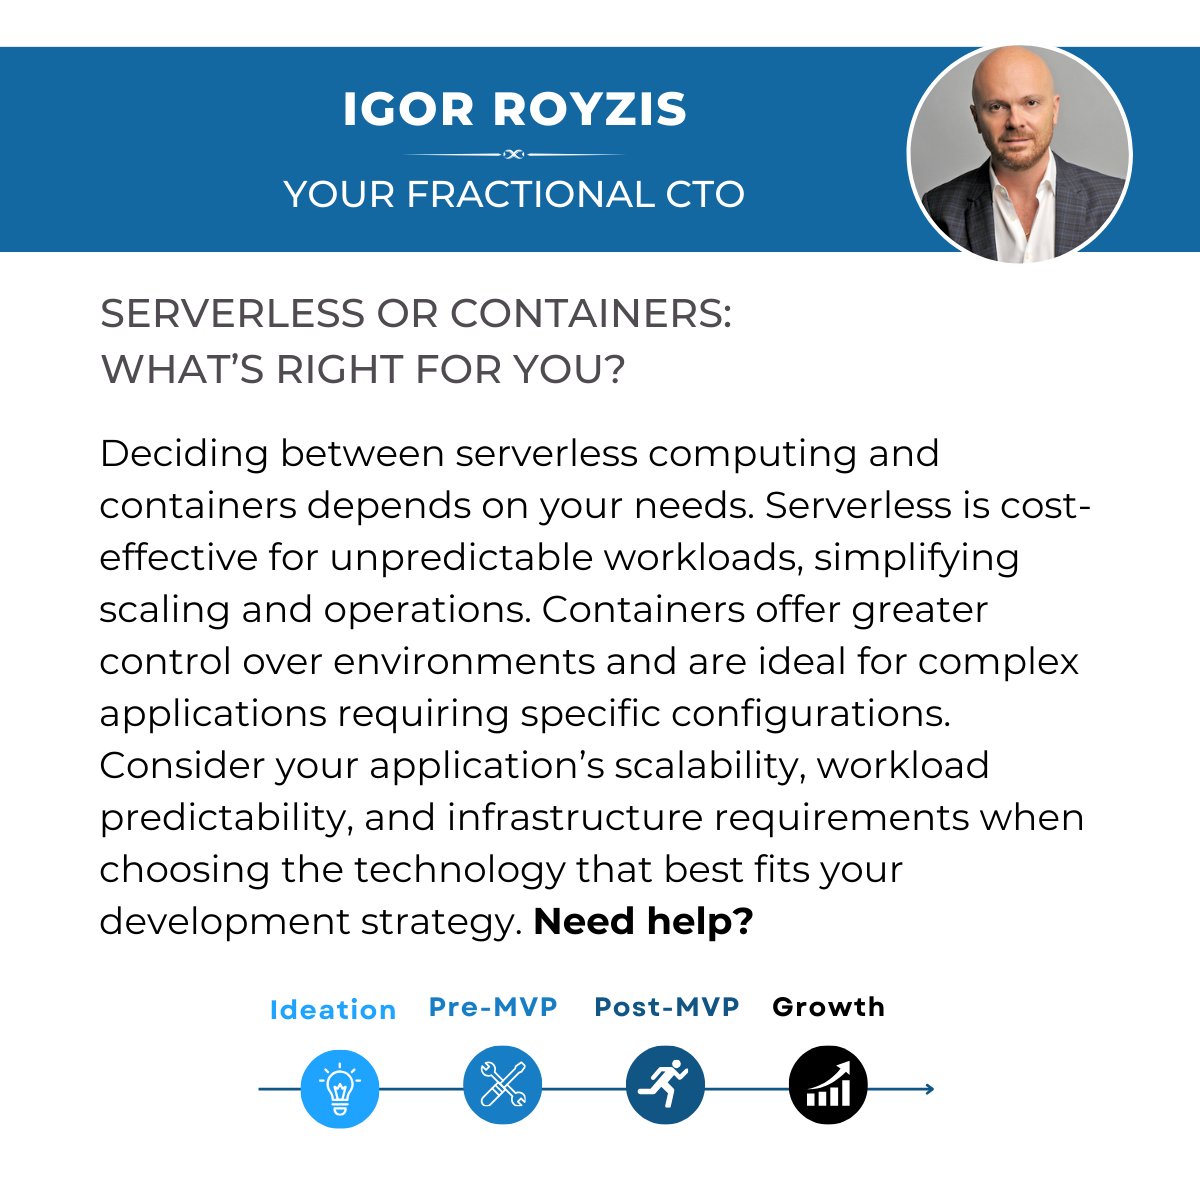 Serverless or Containers: What’s Right for You?

Schedule your free consultation with me by clicking the link below!
lnkd.in/exEN757r

#FractionalCTO #Startups, #Technology, #CTO, #TechLeadership, #StartupGrowth